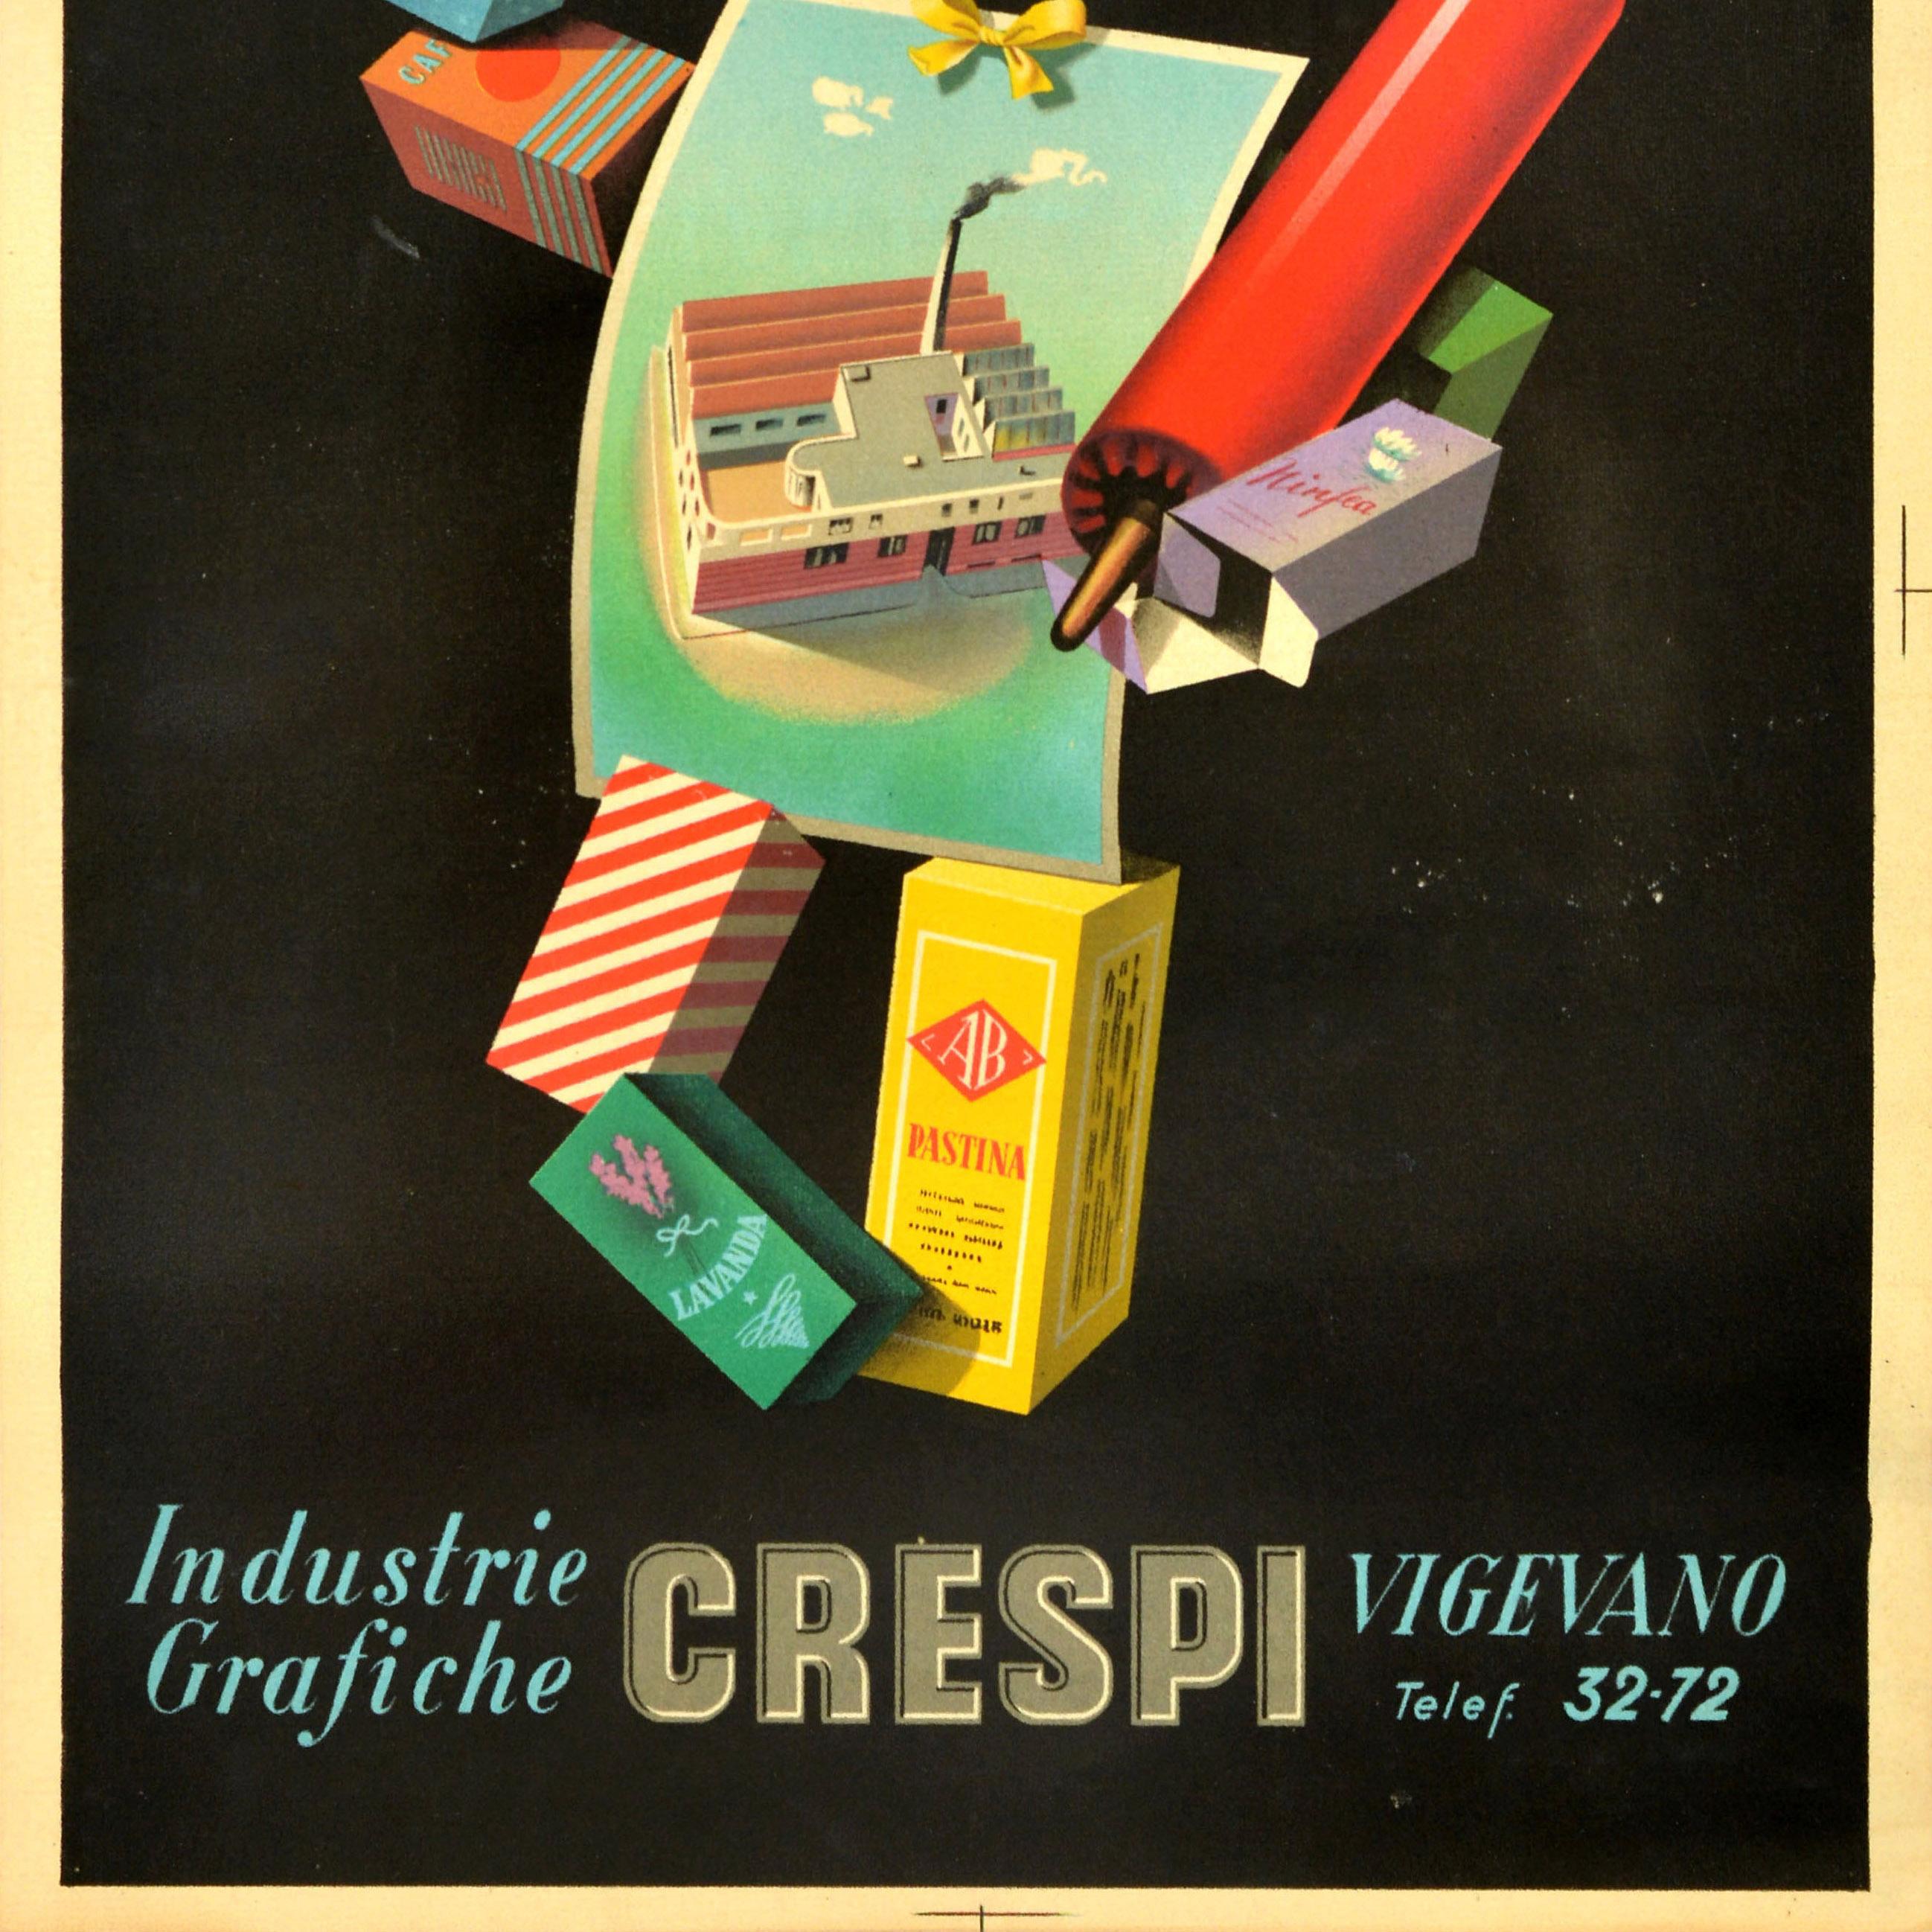 Original vintage advertising poster - per la confezione fine Industrie Grafiche Crespi Vigevano Telef. 3272 / Graphic Industries for fine packaging - featuring an image of a man made out of various packing boxes holding a gift box with a ribbon on